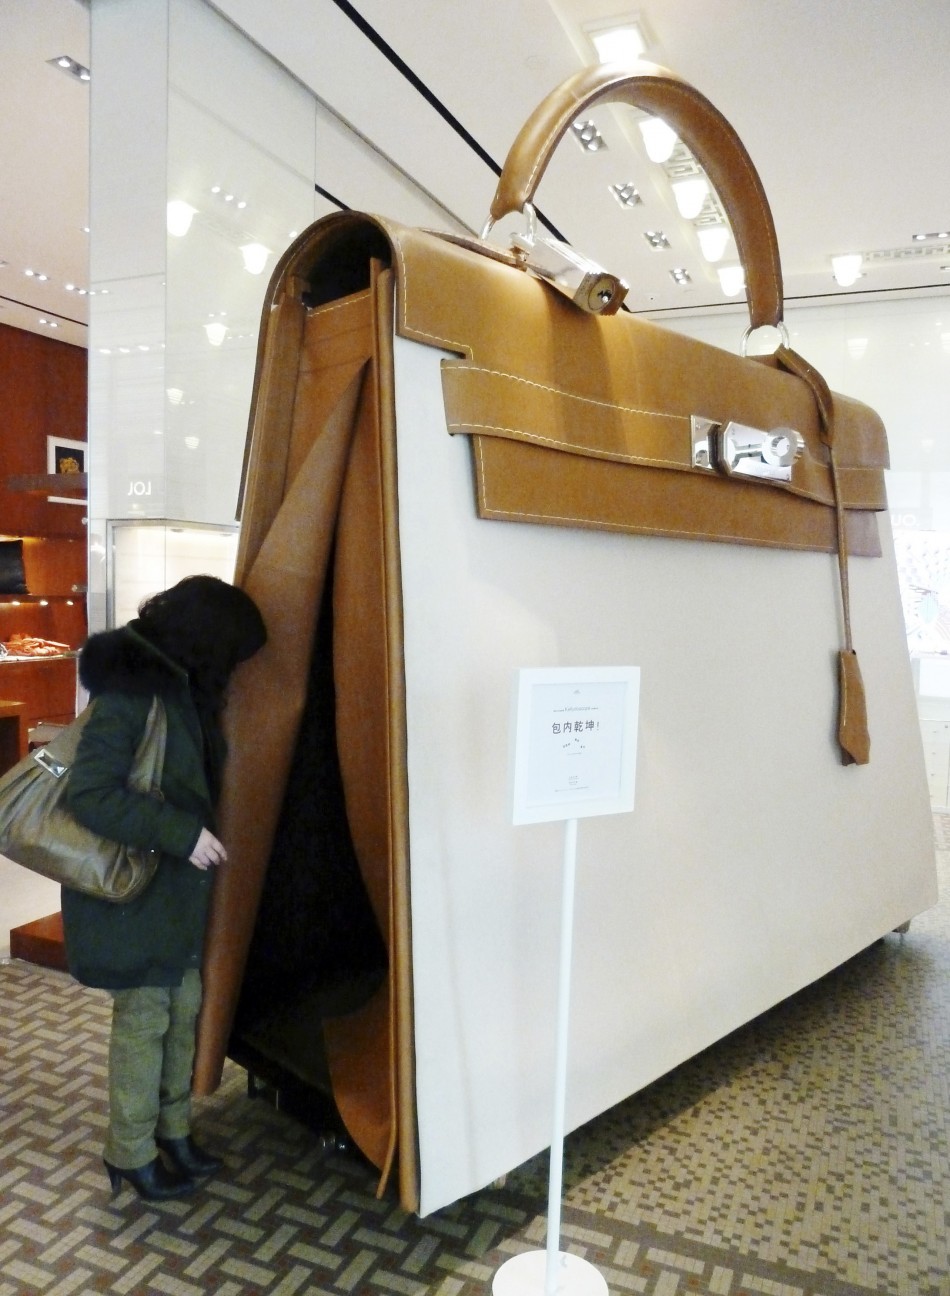 A customer looks into a giant Hermes Kelly handbag at a Hermes boutique in Nanjing